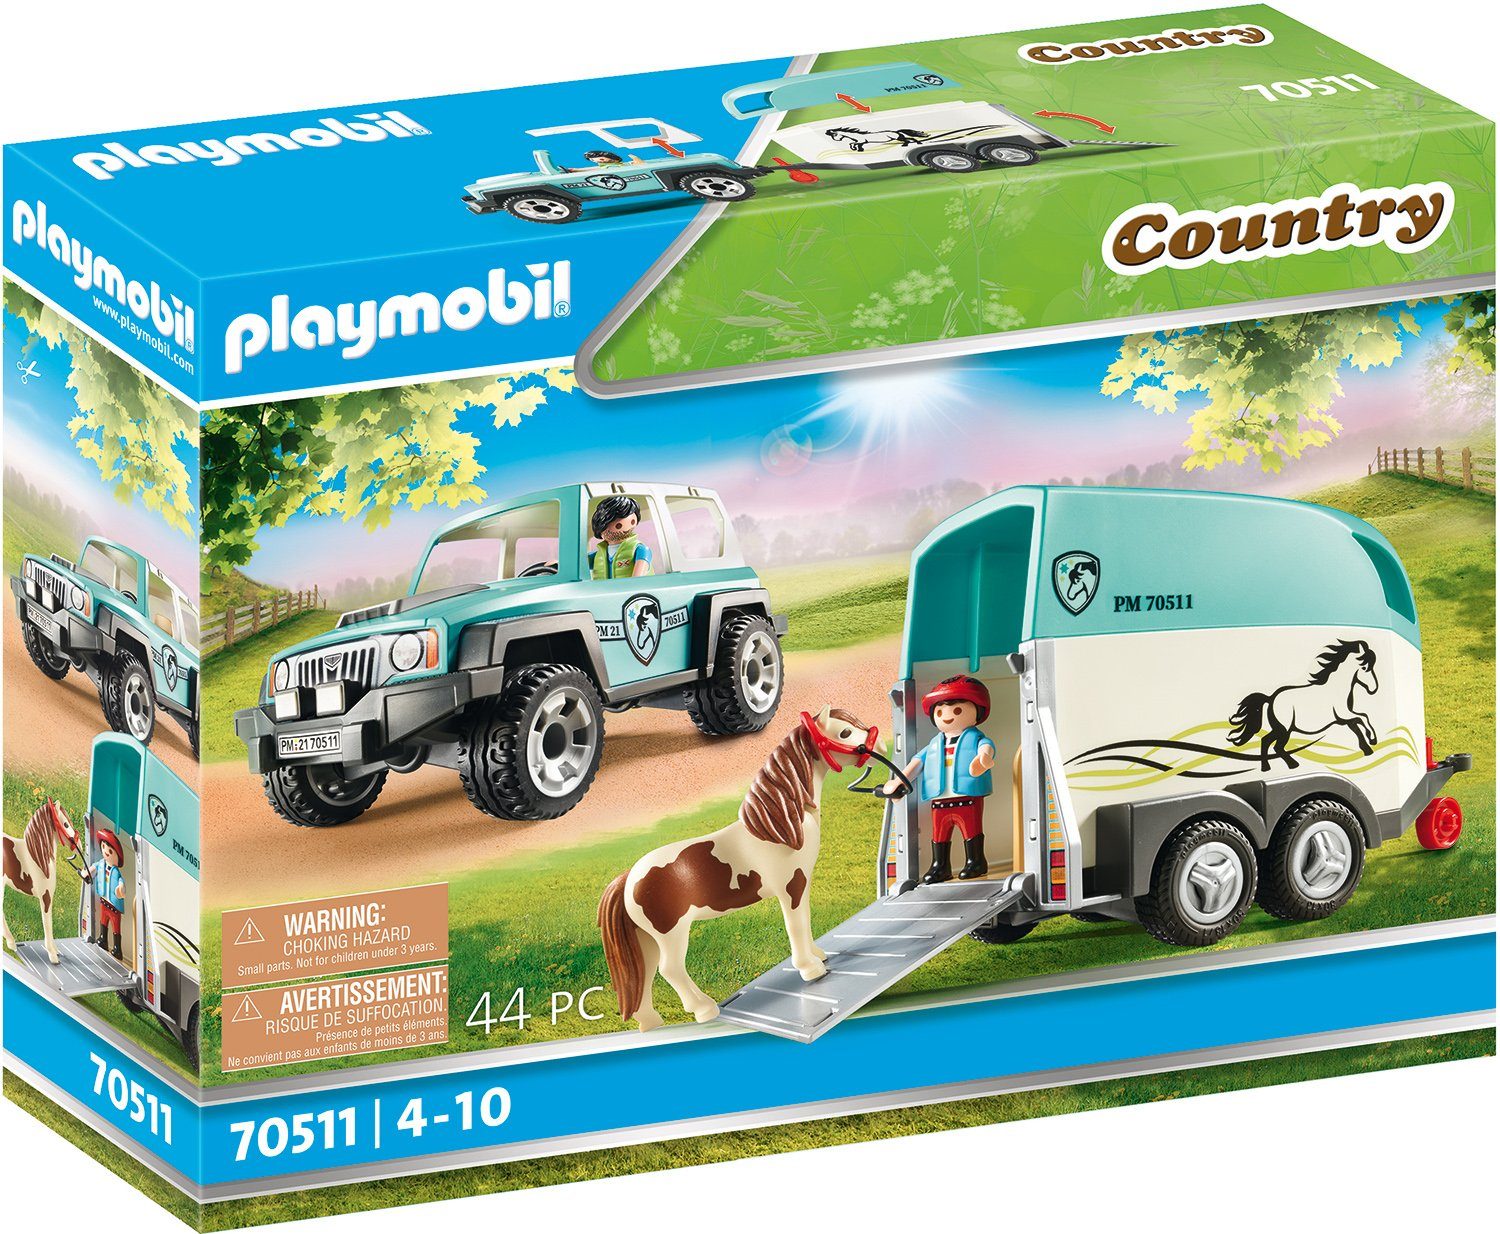 Playmobil® Country, Made Germany (44 St), mit in PKW Konstruktions-Spielset Ponyanhänger (70511),